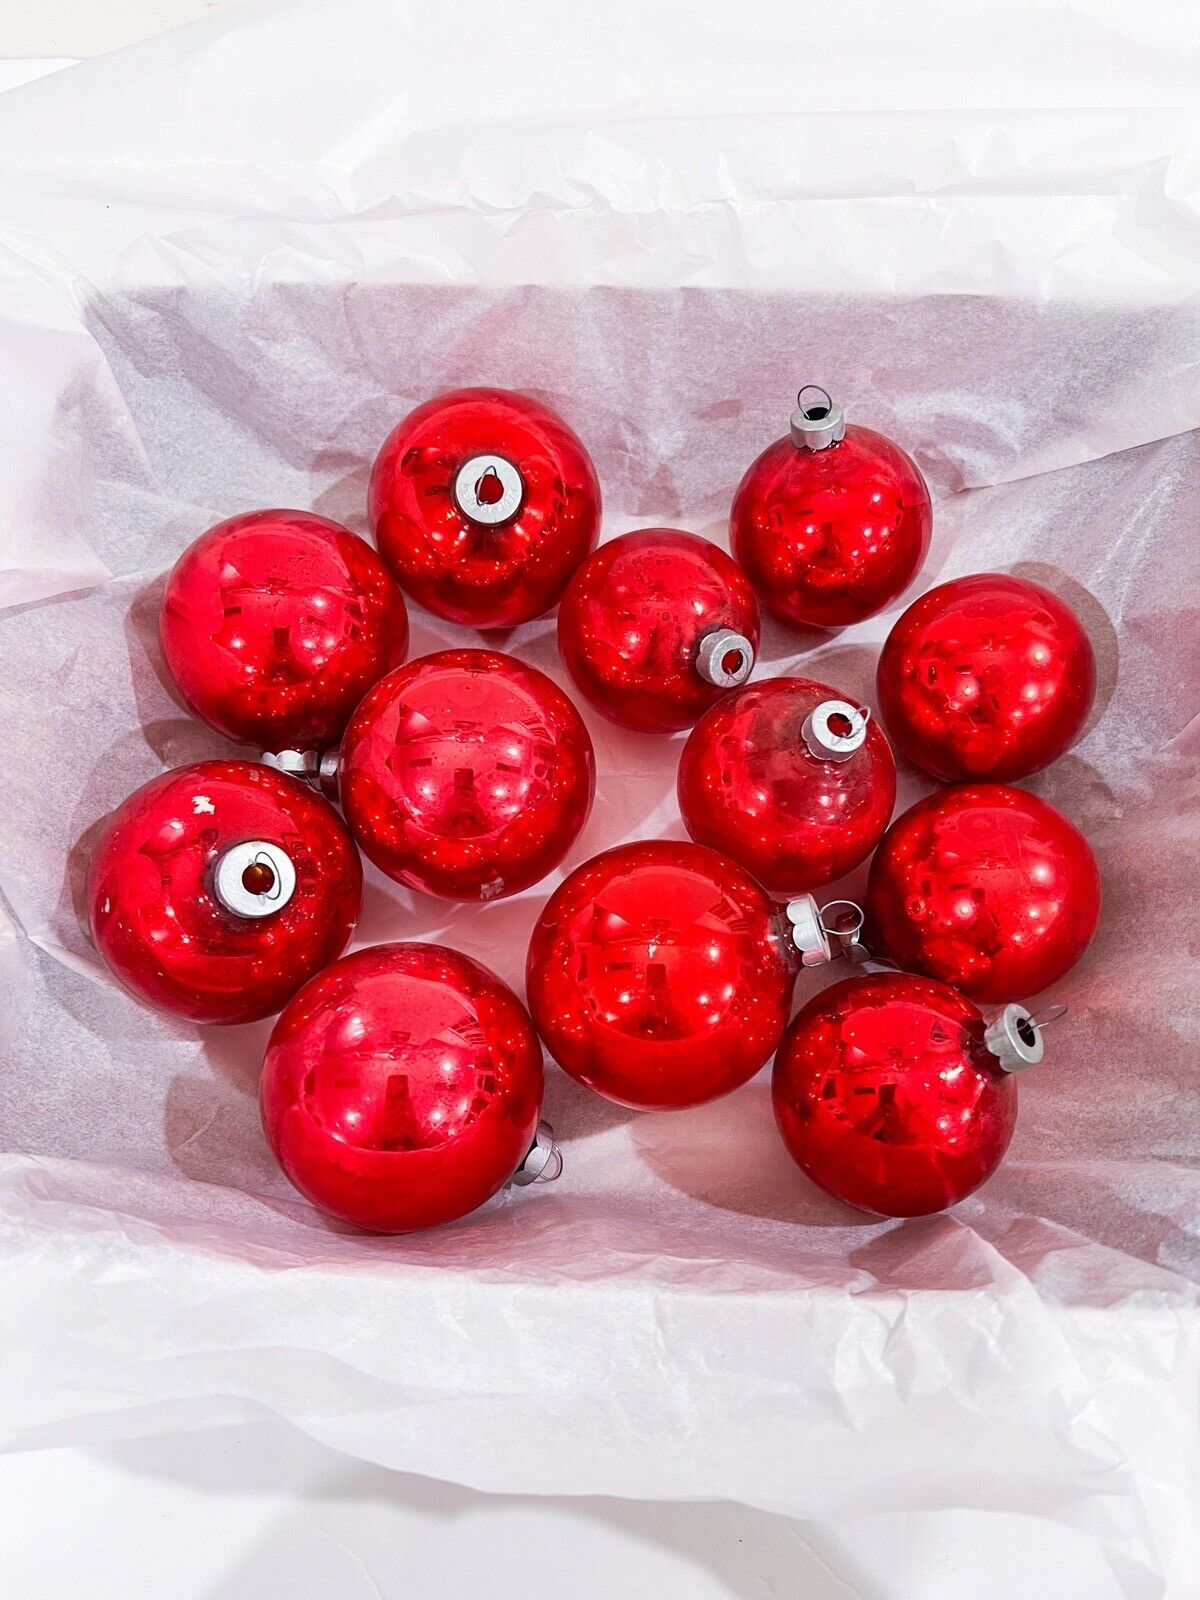 Lot of 12 Vintage Glass Round Shiny Brite Made in USA Red Christmas Ornaments